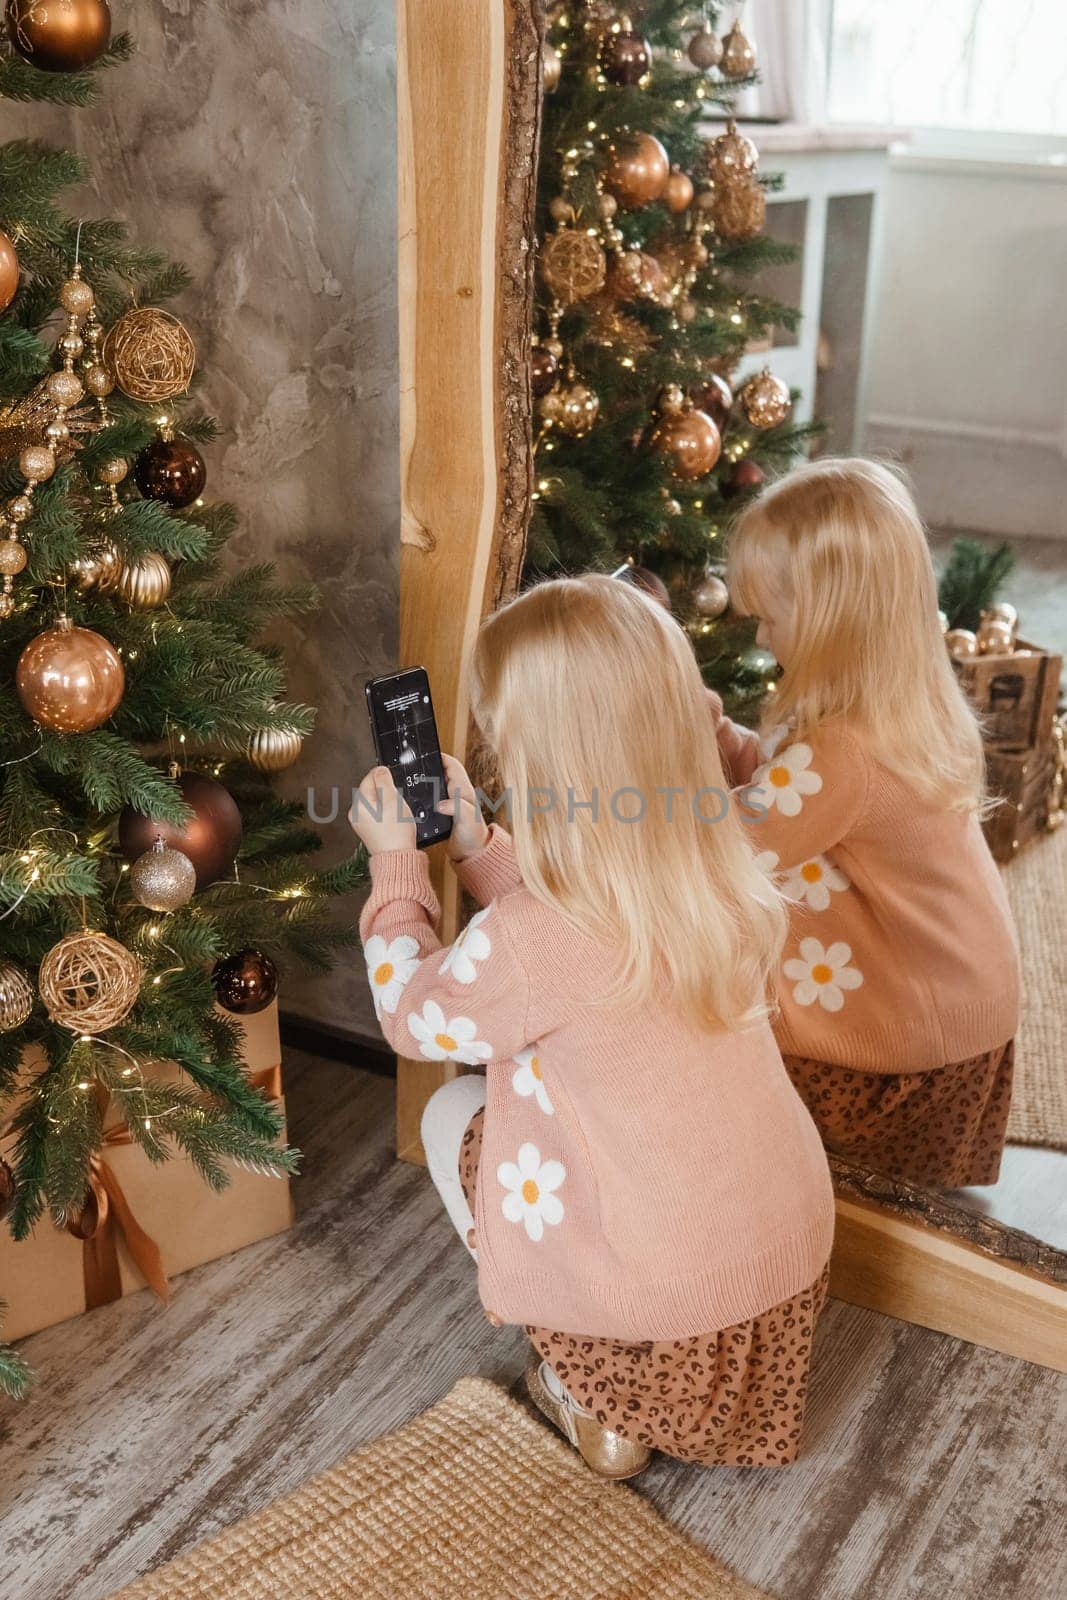 A little blonde girl photographs balloons on a Christmas tree in a festive interior decorated in a New Year's style. The concept of a merry Christmas